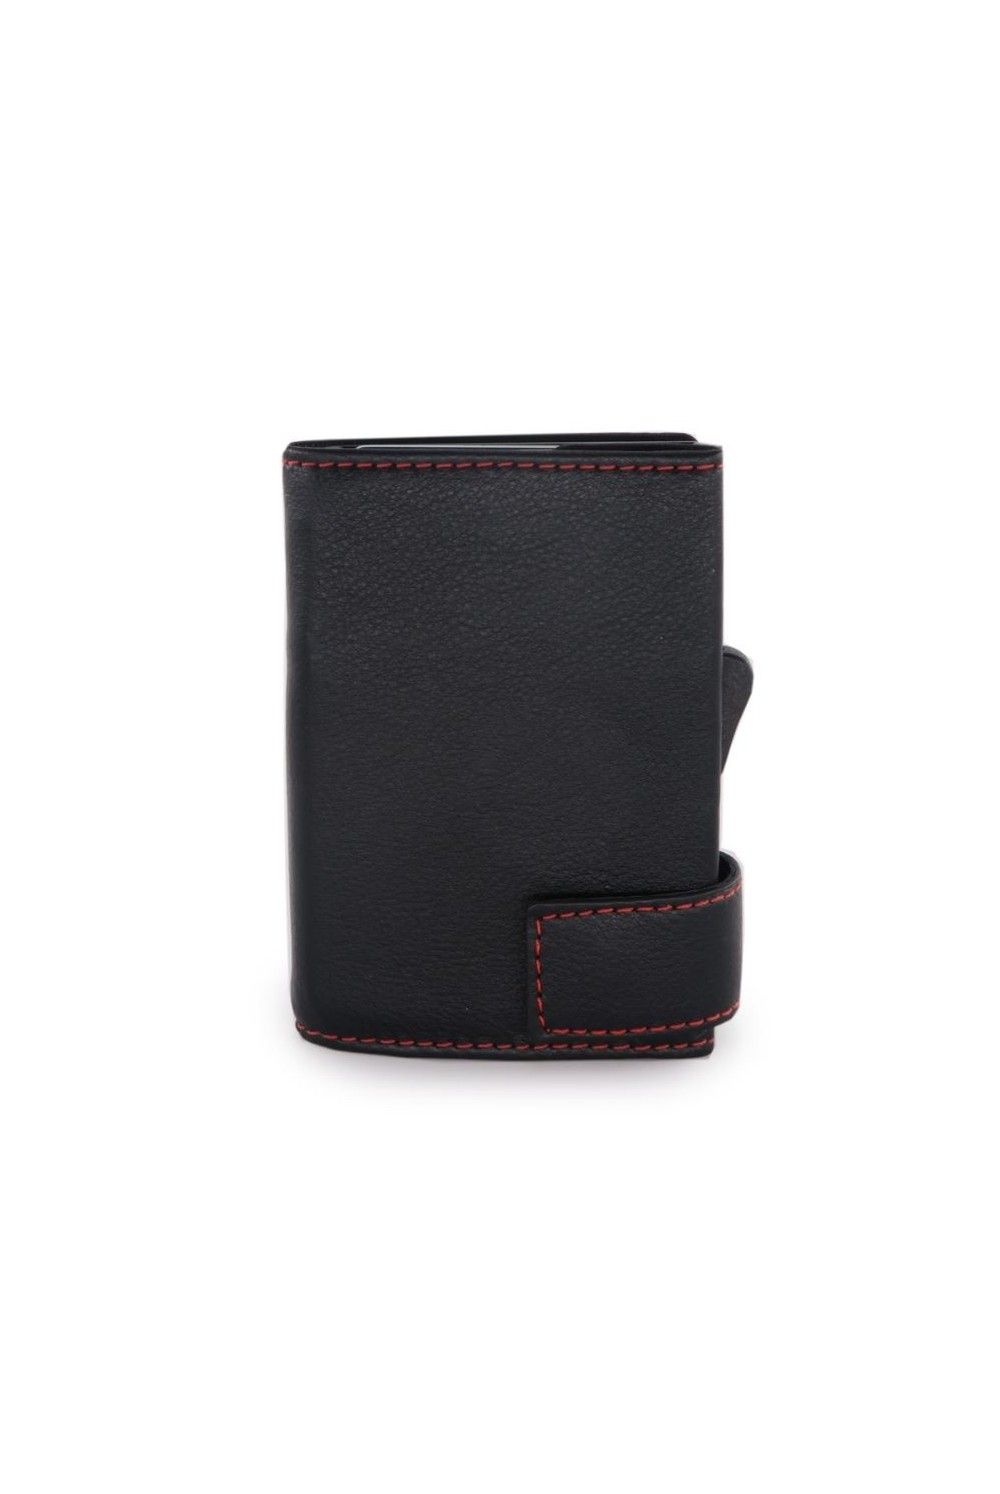 SecWal Card Case RV Leather black-red